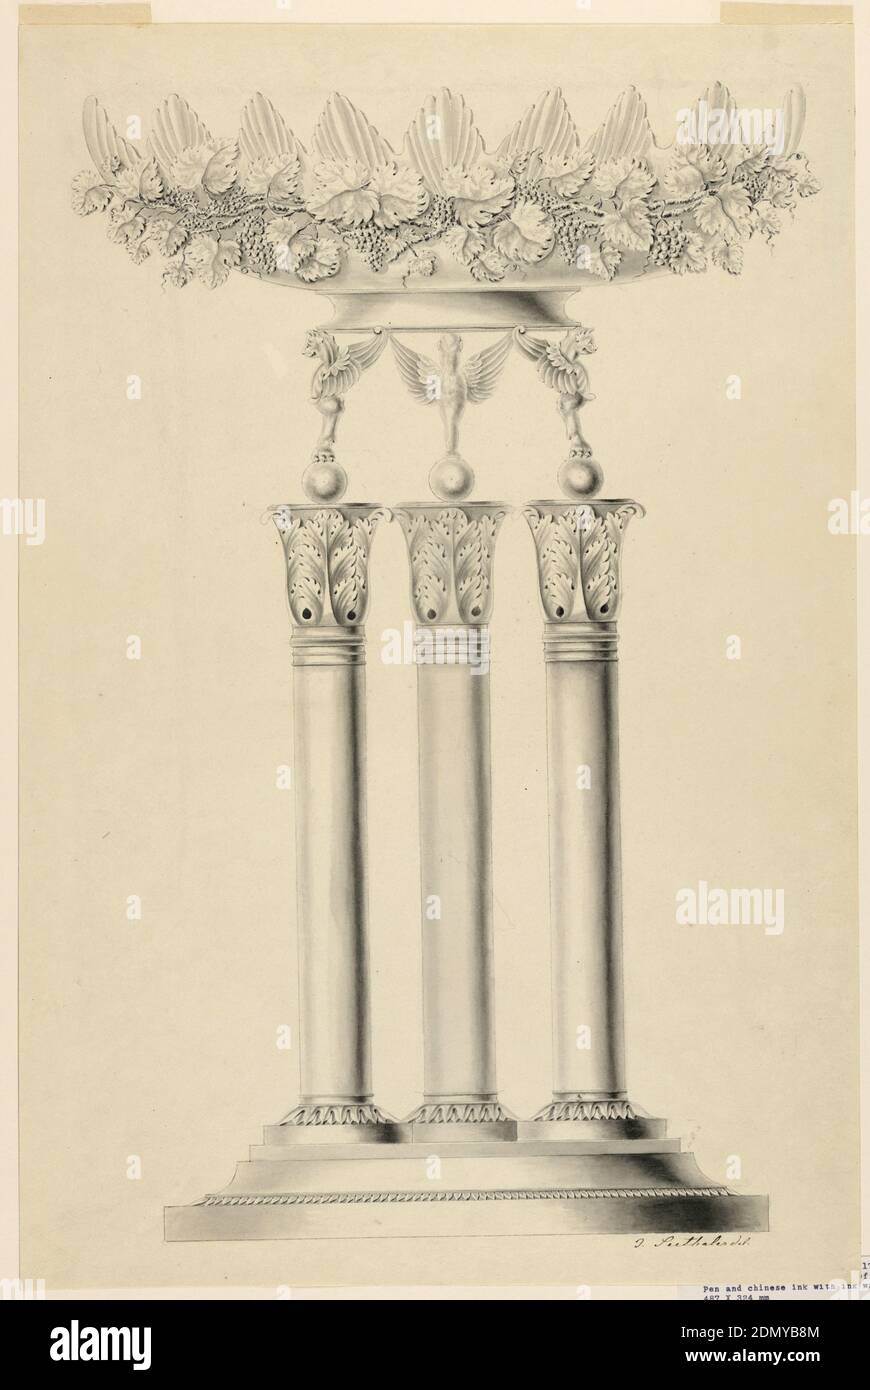 Design for the Silver Mount for a Glass Fruit Bowl, Joseph Anton Seethaler II, German, 1799–1868, Pen and black ink, brush and gray wash on paper, Chimeras standing upon three columns support the base of a bowl with scalloped top edge. It is surrounded by grape vines., Augsburg, Germany, 1825–35, metalwork, Drawing Stock Photo